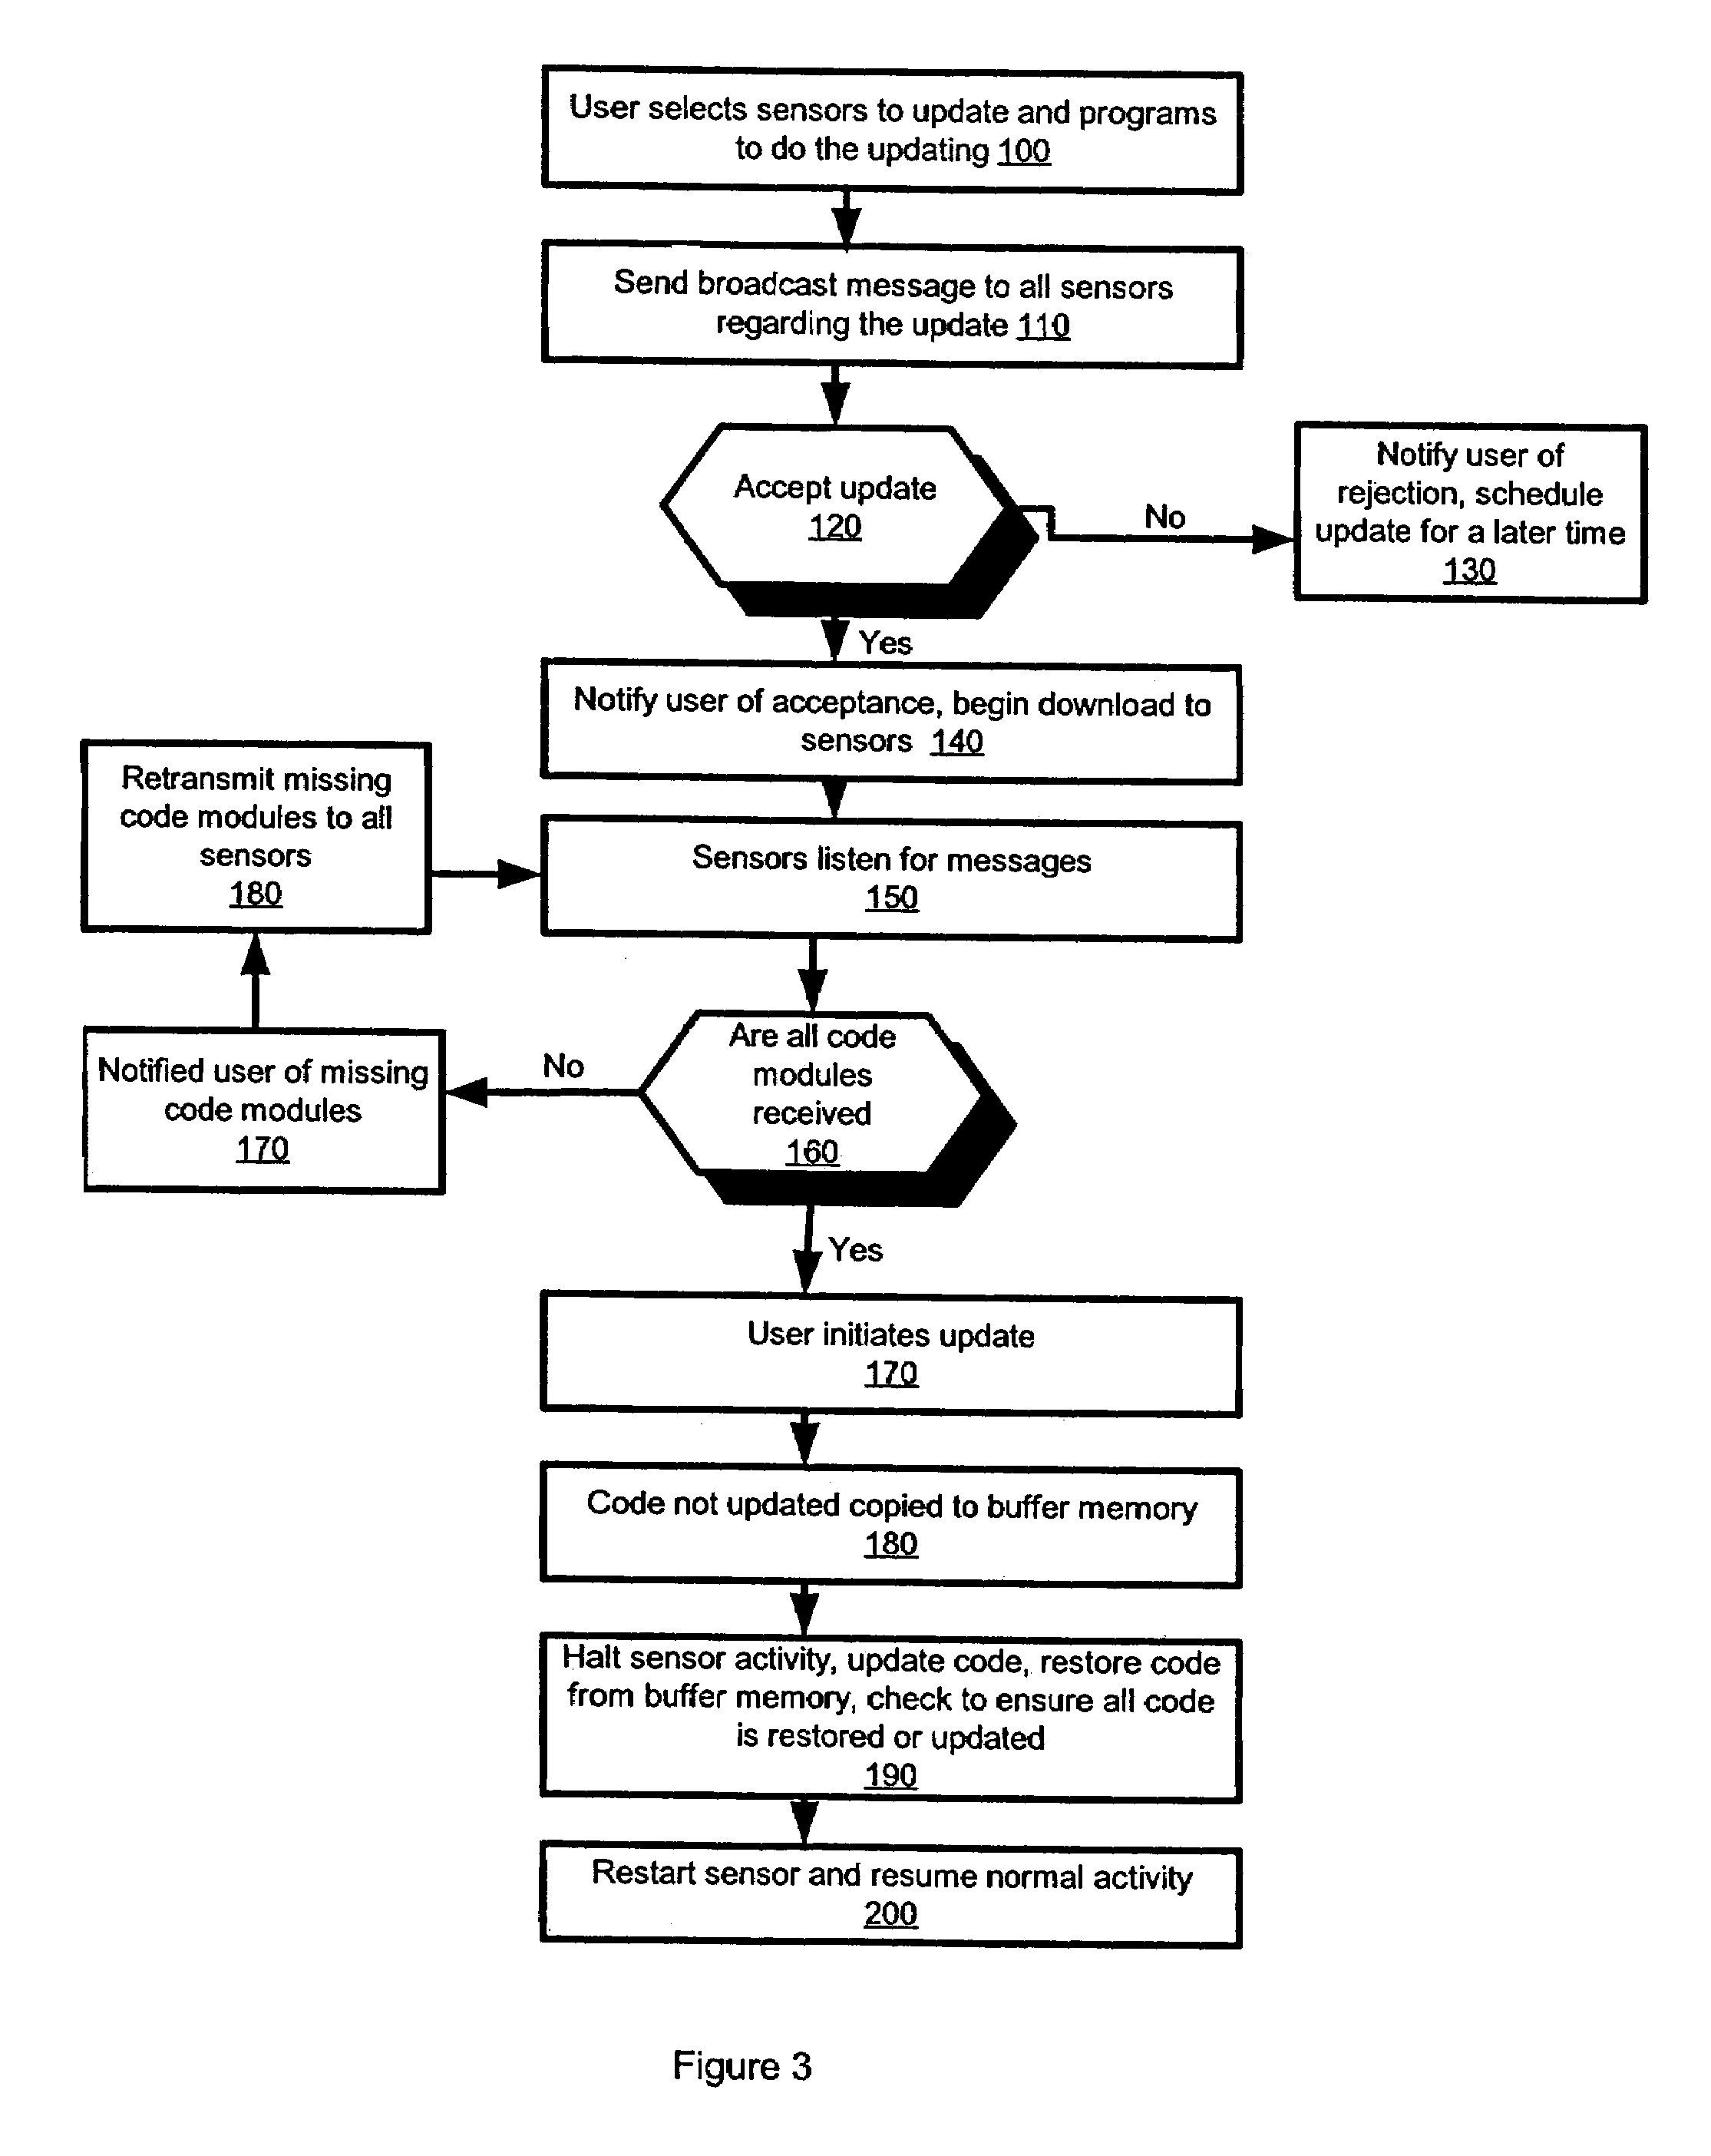 System and method for updating a network of remote sensors